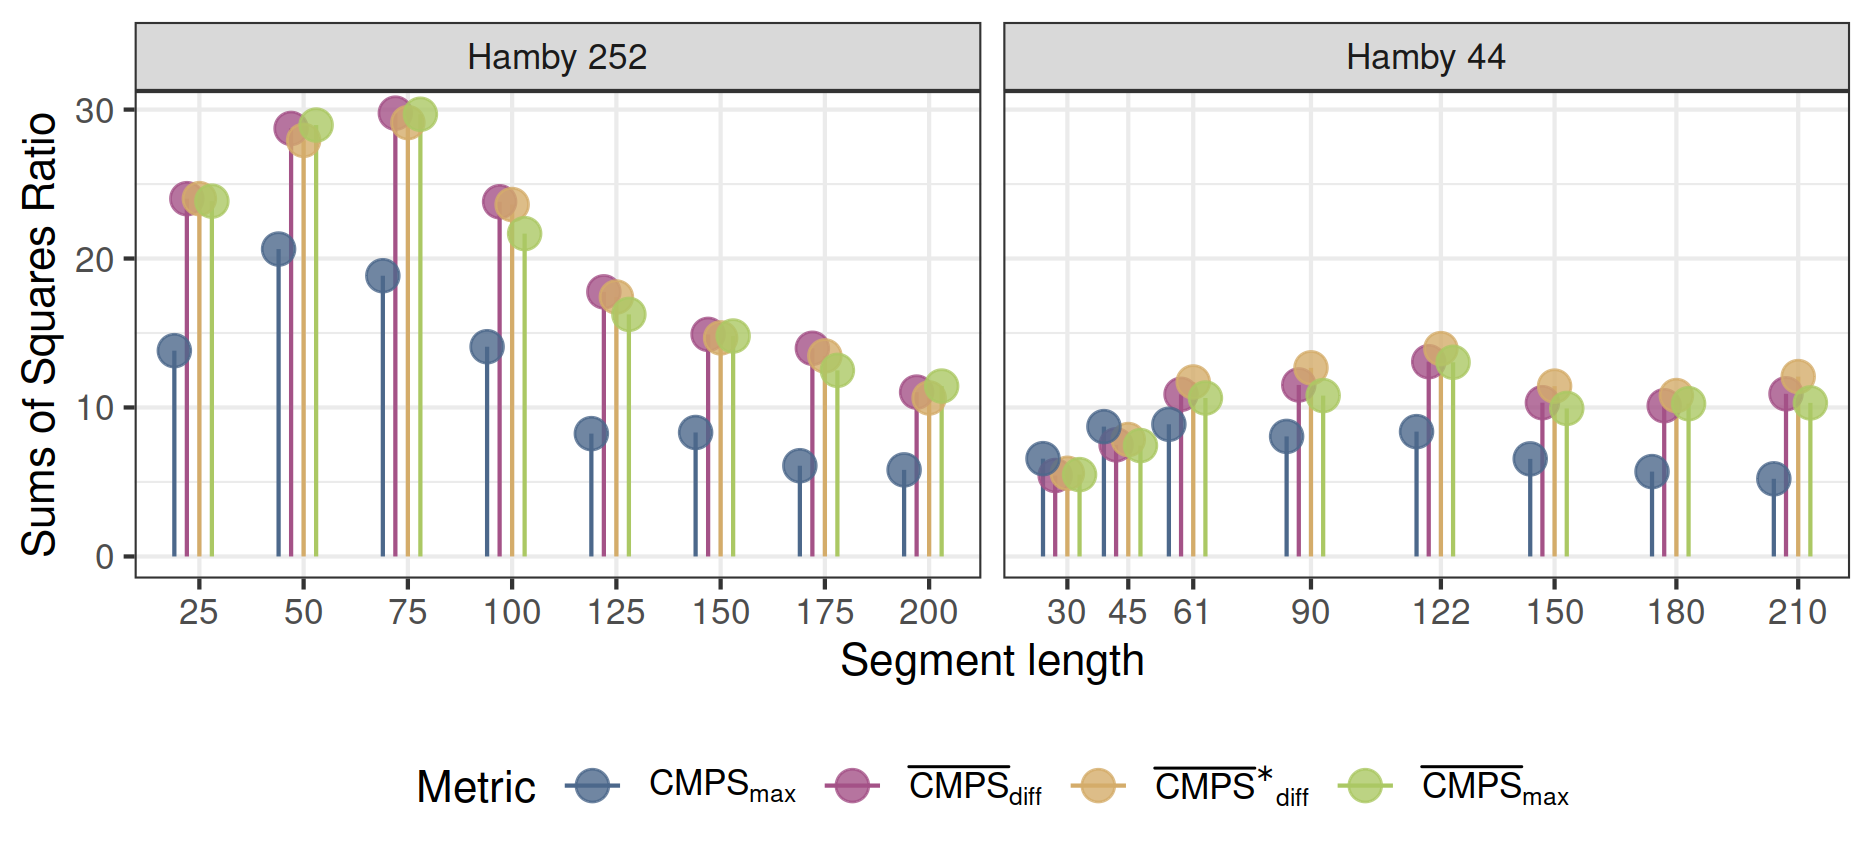 Comparison of results from the CMPS algorithm based on different basis segment lengths (parameter seg\_length). Only the $\mathrm{CMPS_{max}}$ metric suggests that the default values for the basis segment length result in the best separation. Better separation is achieved based on the modified CMPS metrics, including the newly suggested ones. For Hamby 252 these metrics agree on a segment length of 75, and a segment length of 122 for Hamby 44 yields better results. 